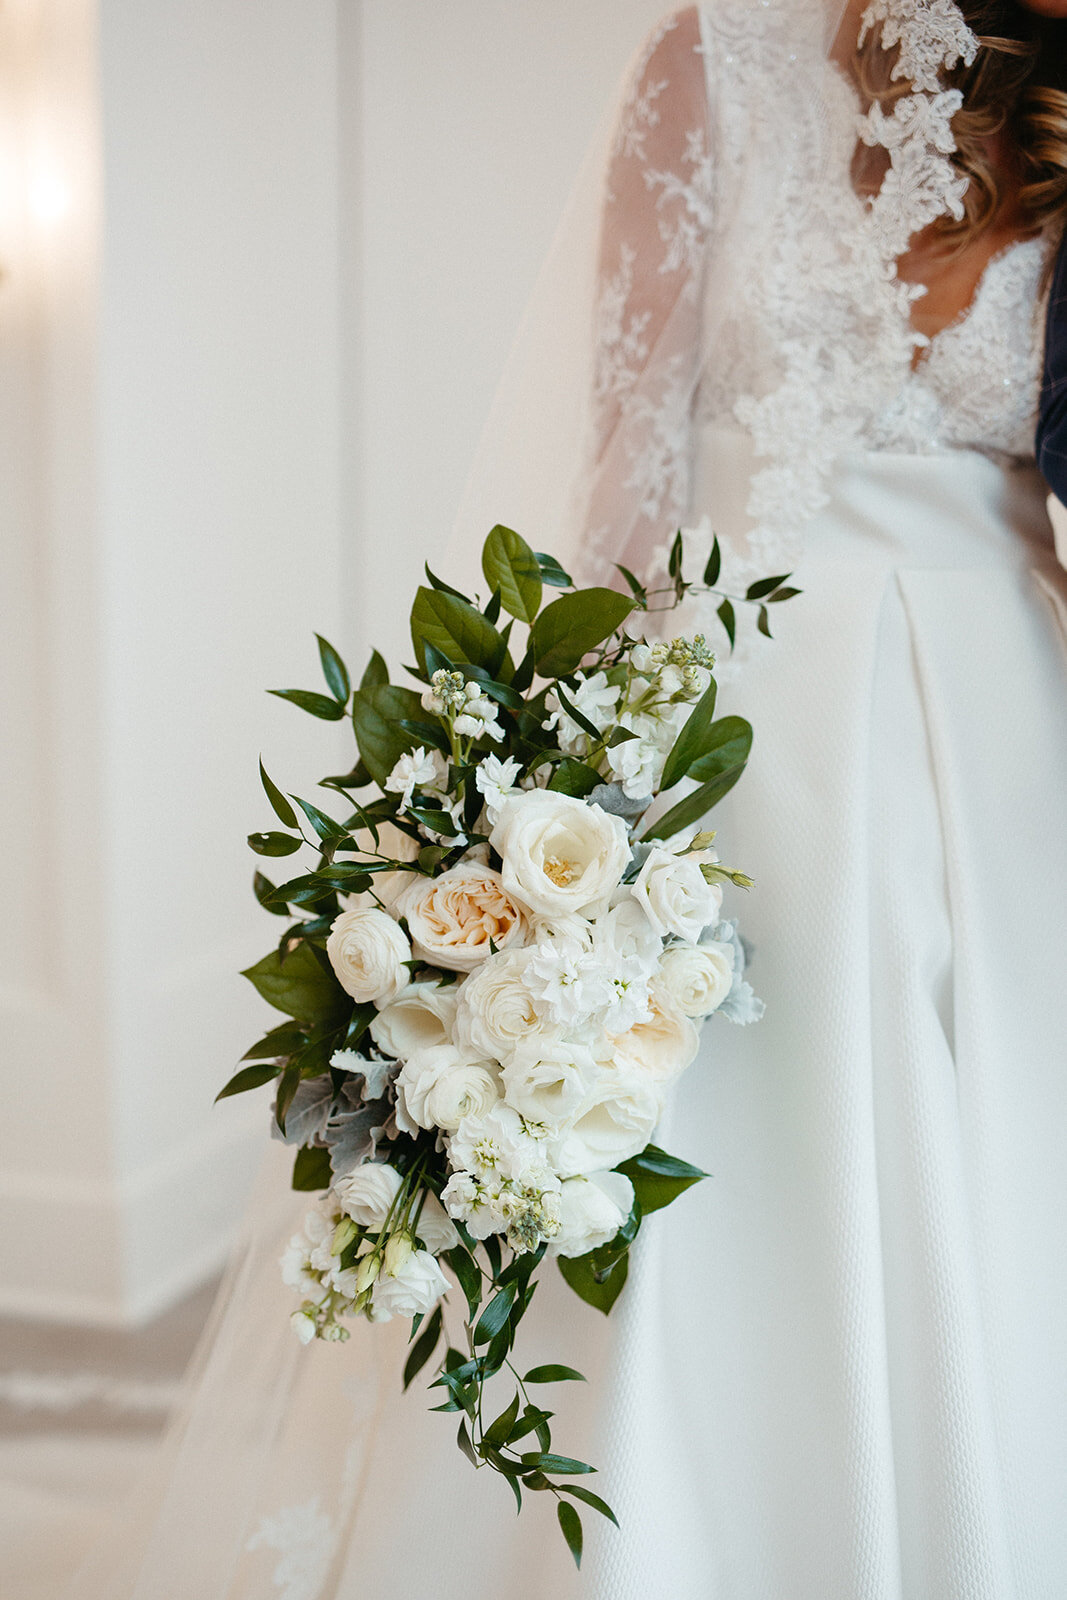 Close up of a white bouquet with greenery and a bride in a white wedding gown.